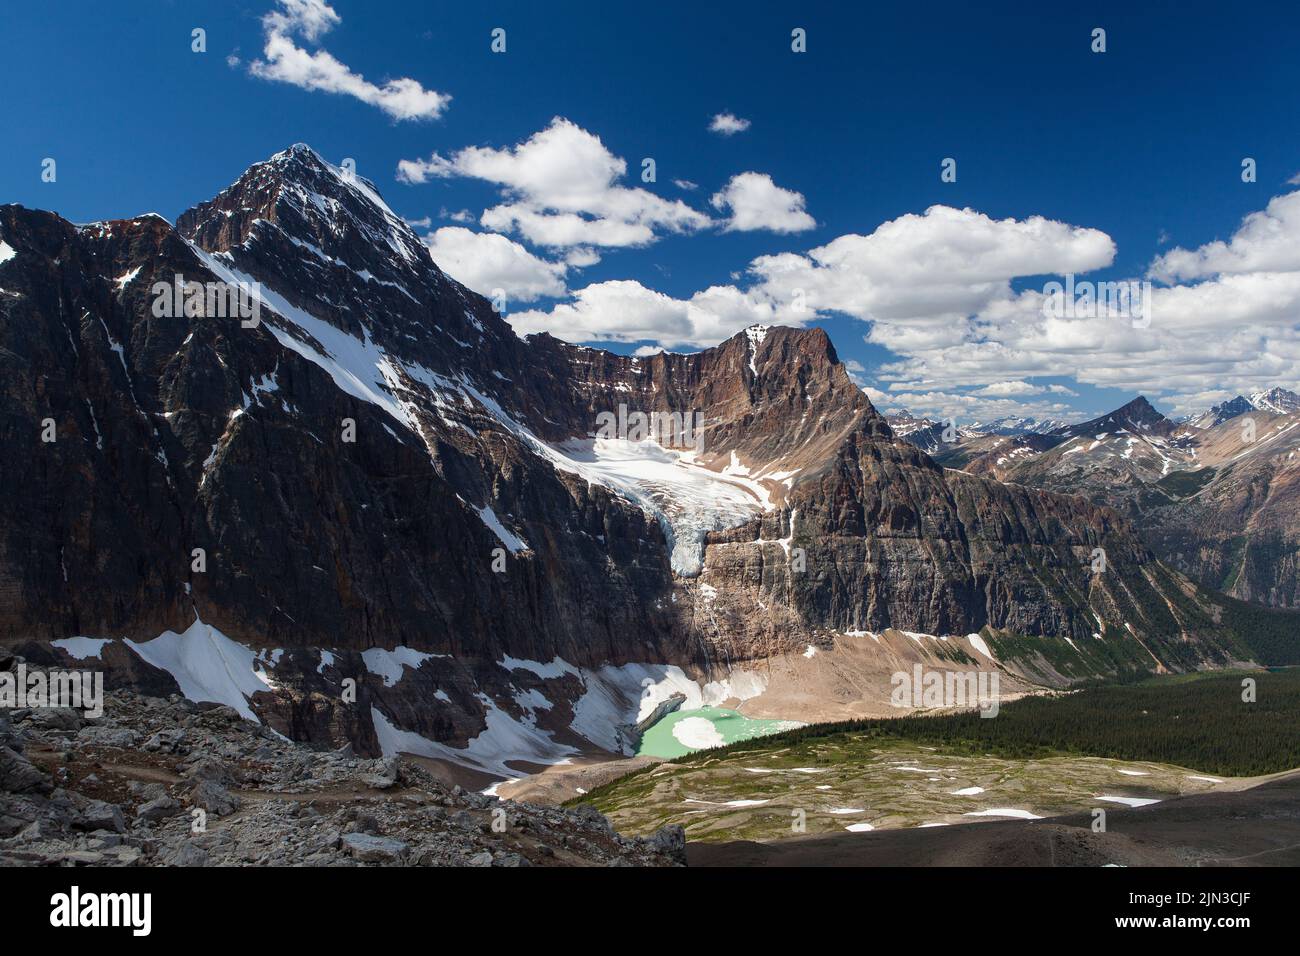 Mount Edith Cavell with Angel glacier Stock Photo